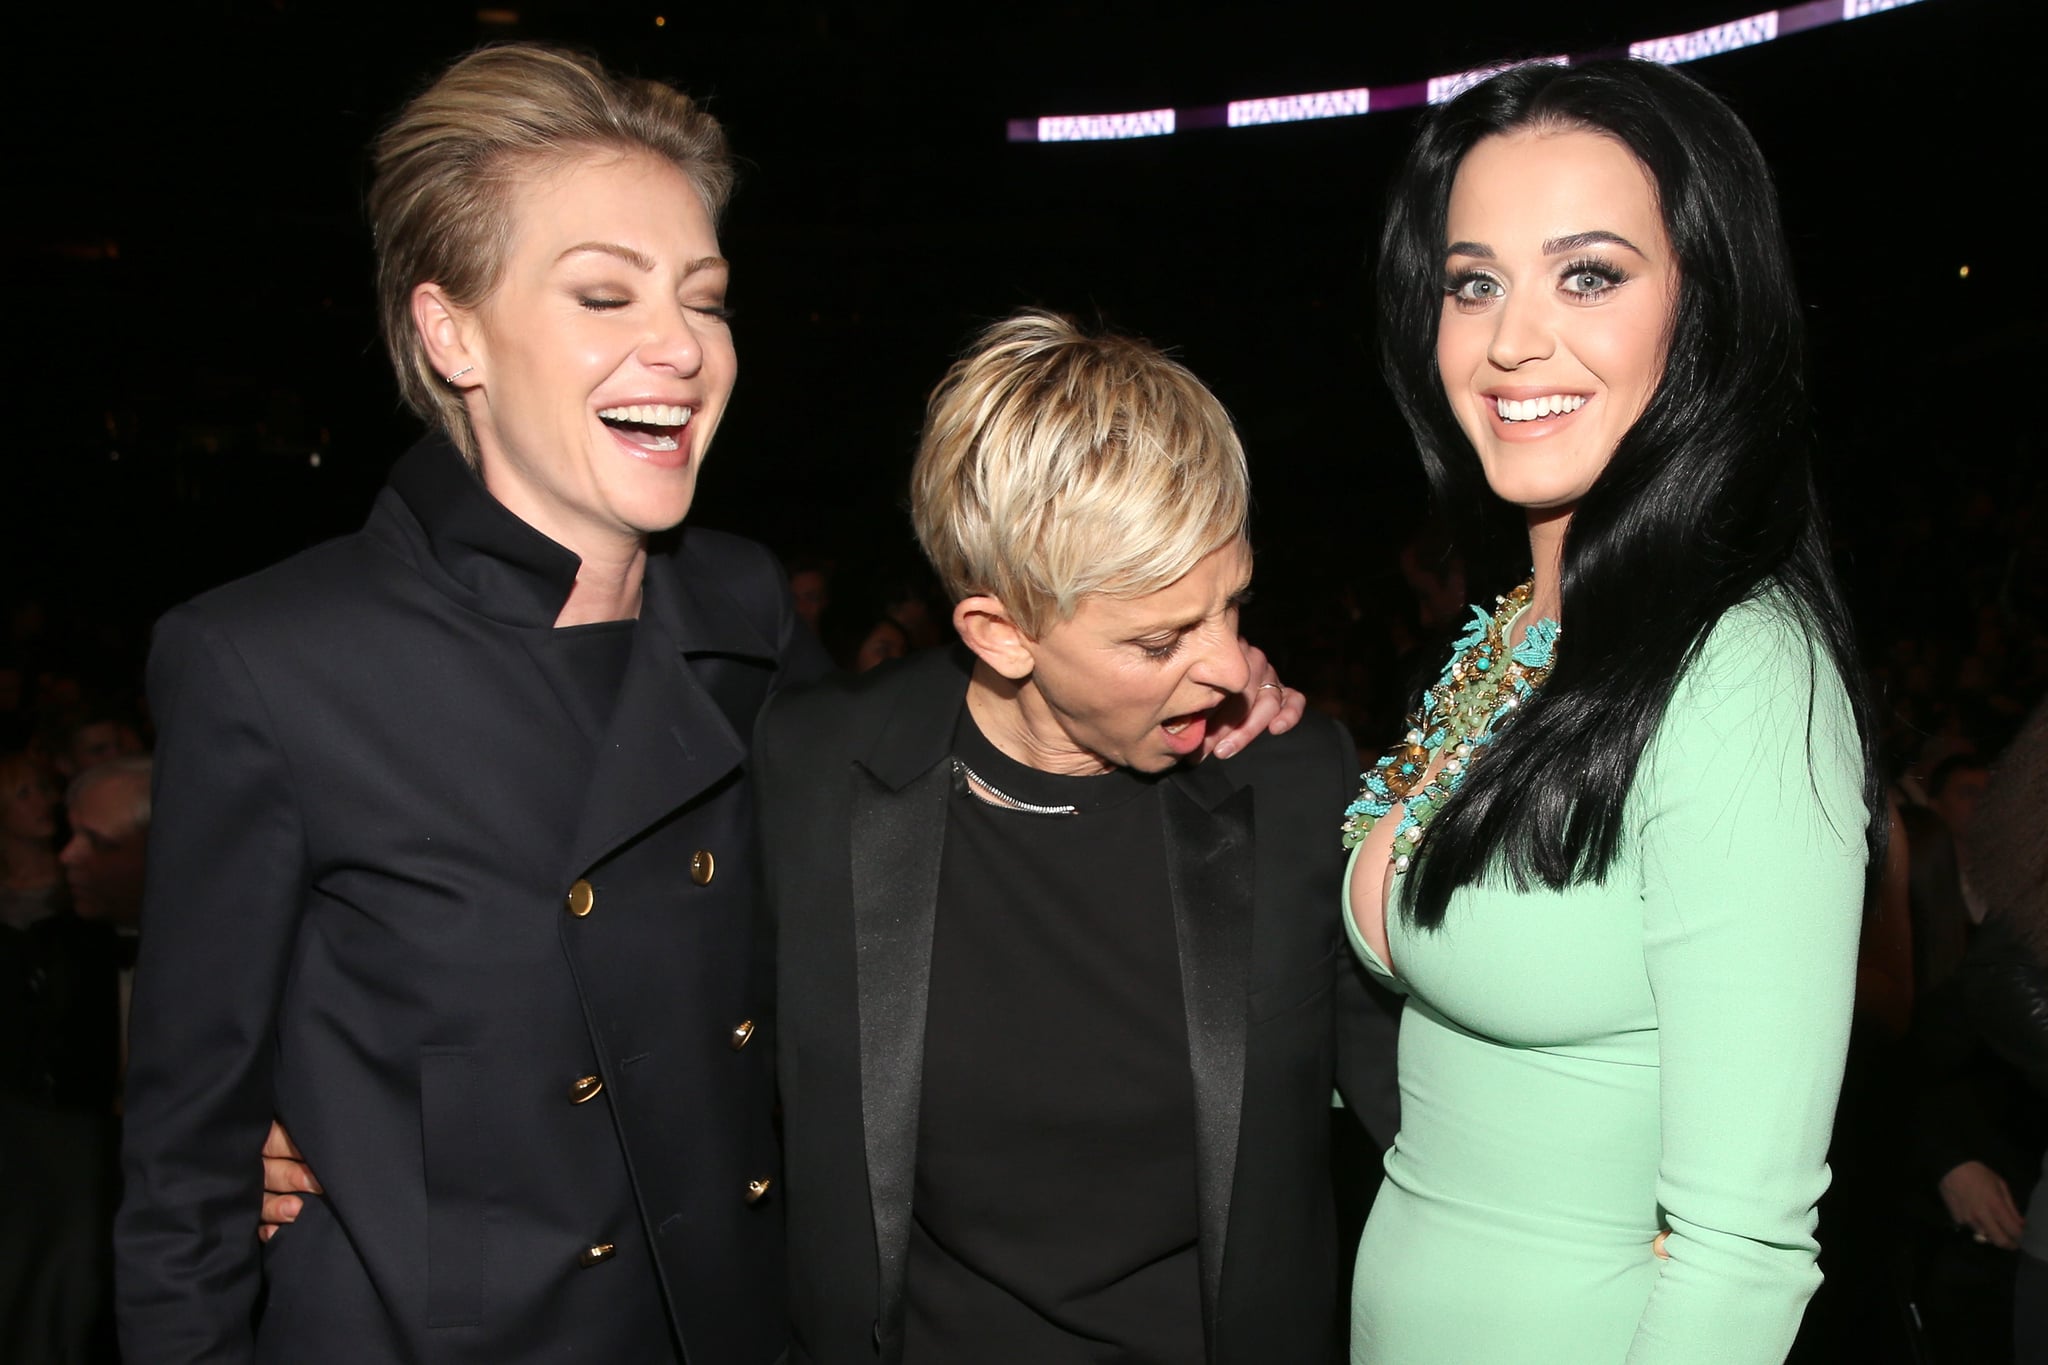 Portia de Rossi and Ellen DeGeneres checked out Katy Perry at the show in 2013.